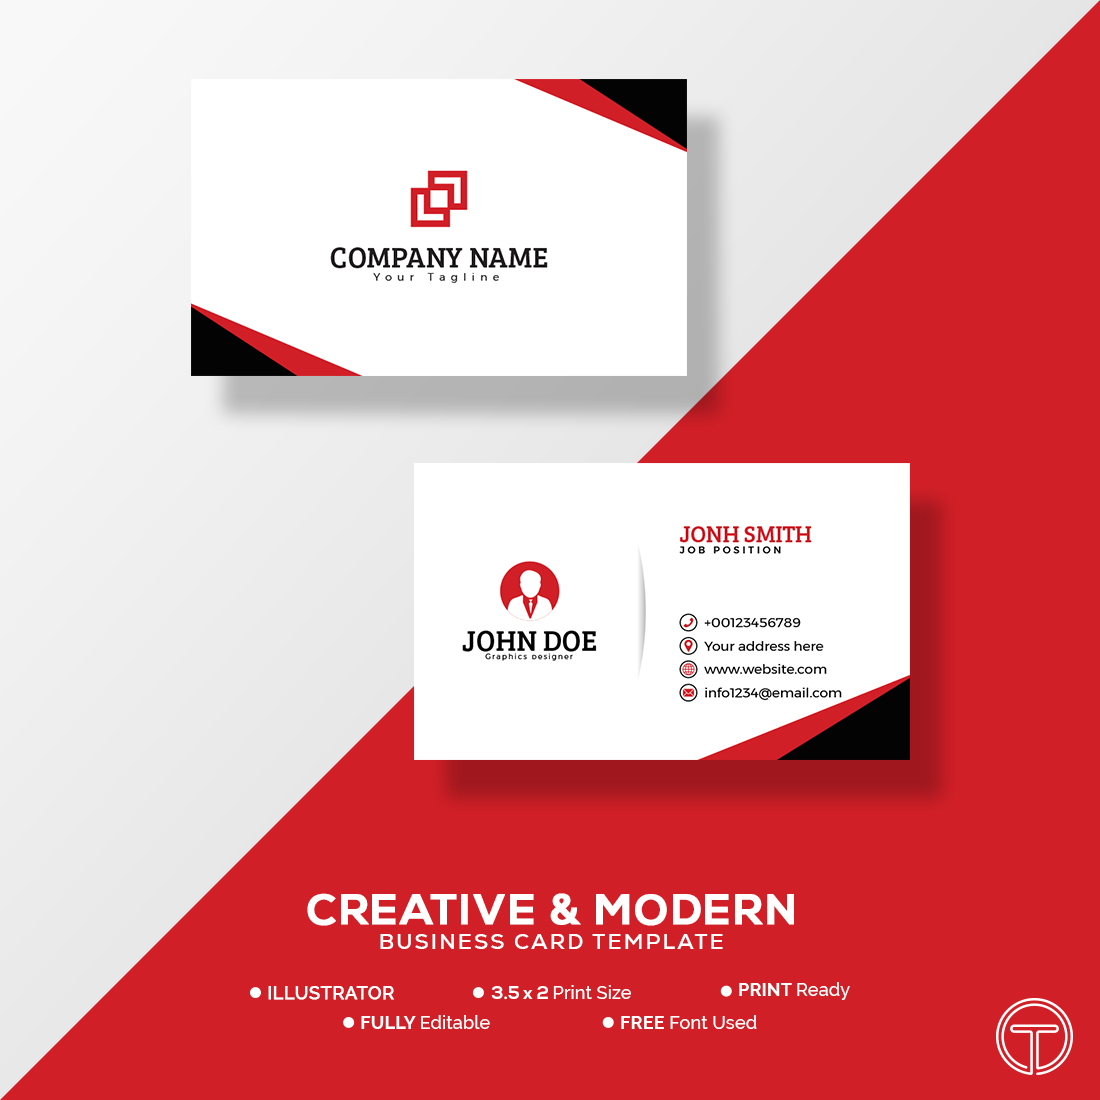 modern red and black business card template flat design 1 1